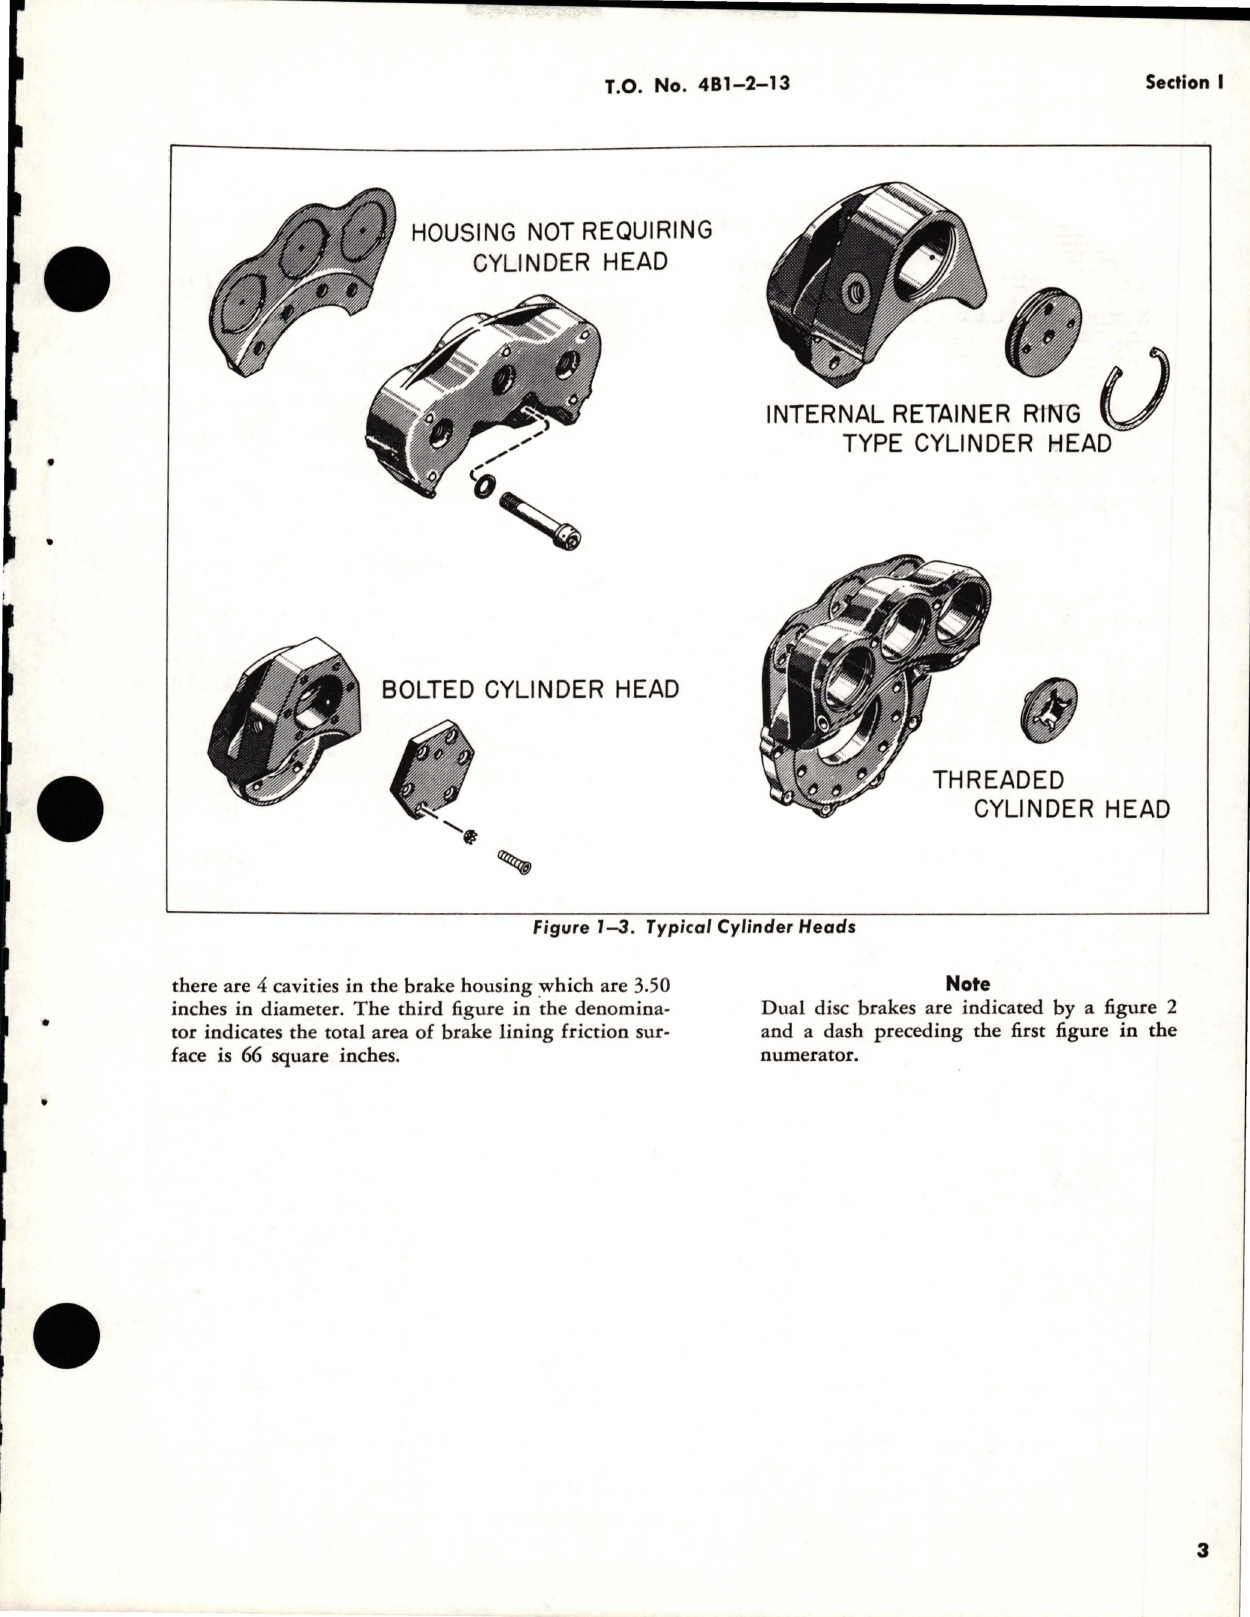 Sample page 7 from AirCorps Library document: Overhaul Instructions for Single and Dual Disc Brakes